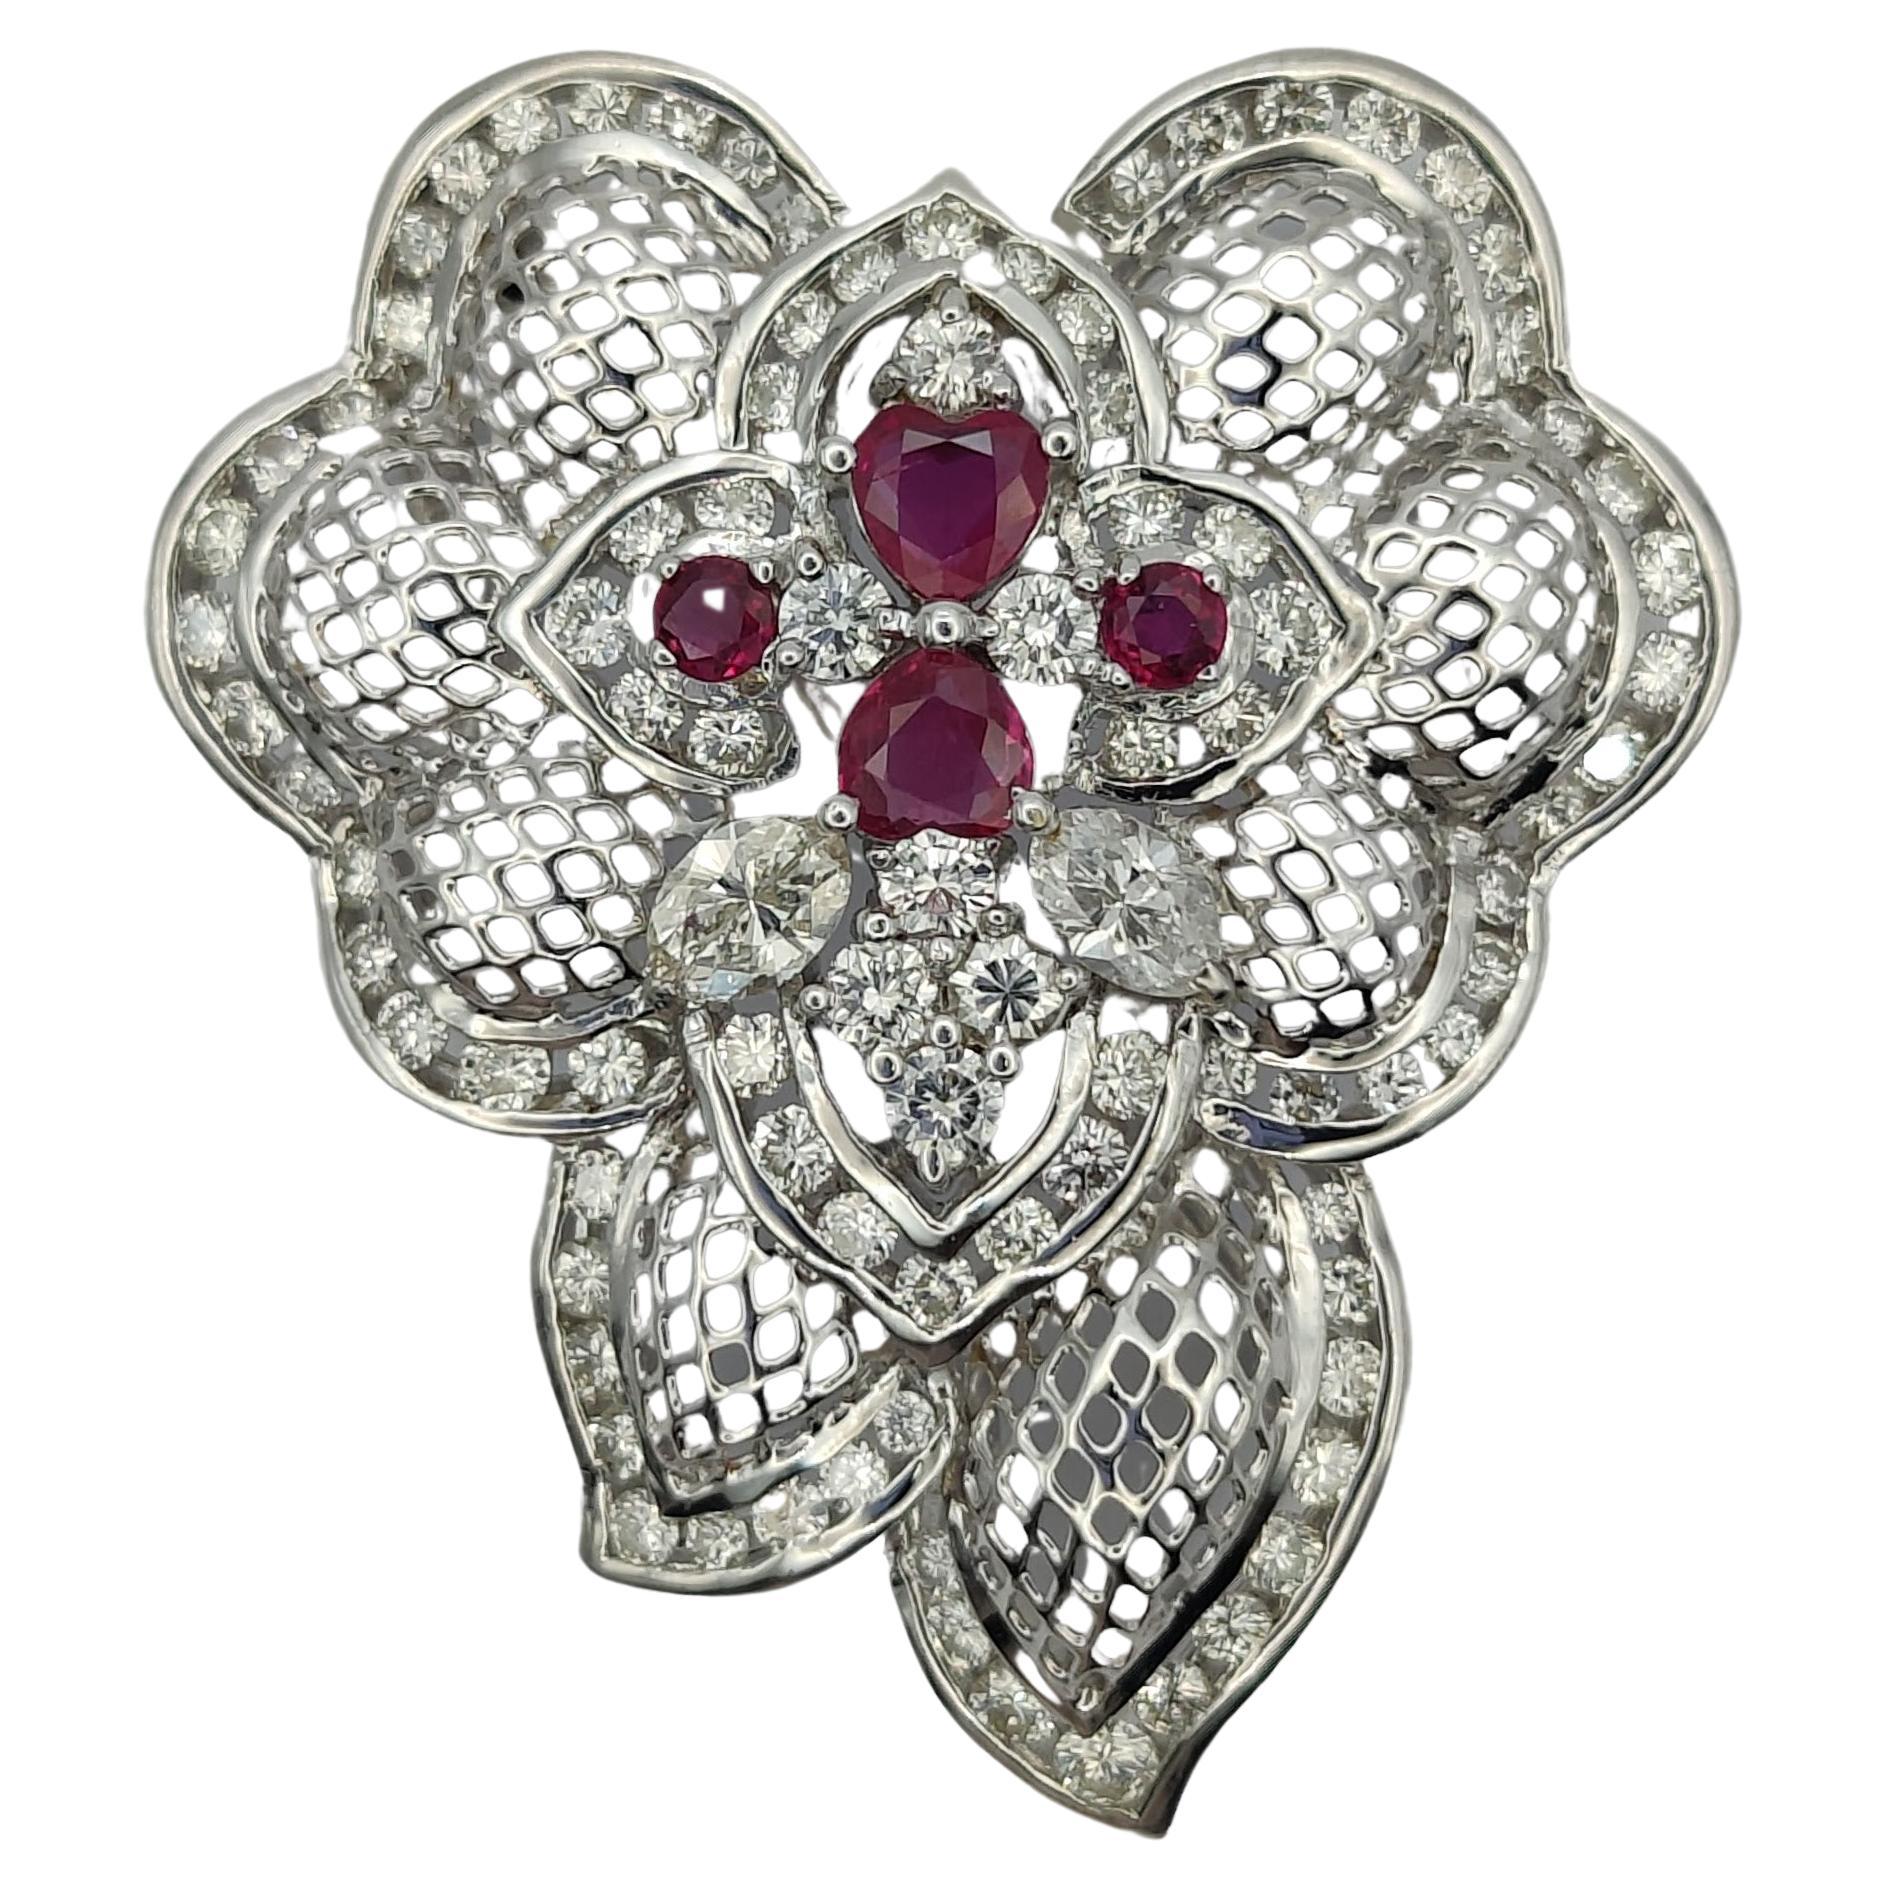 Baroque 0.78 Carat Ruby and 2.7 Carat Diamond Pendant Brooch in 18k White Gold For Sale